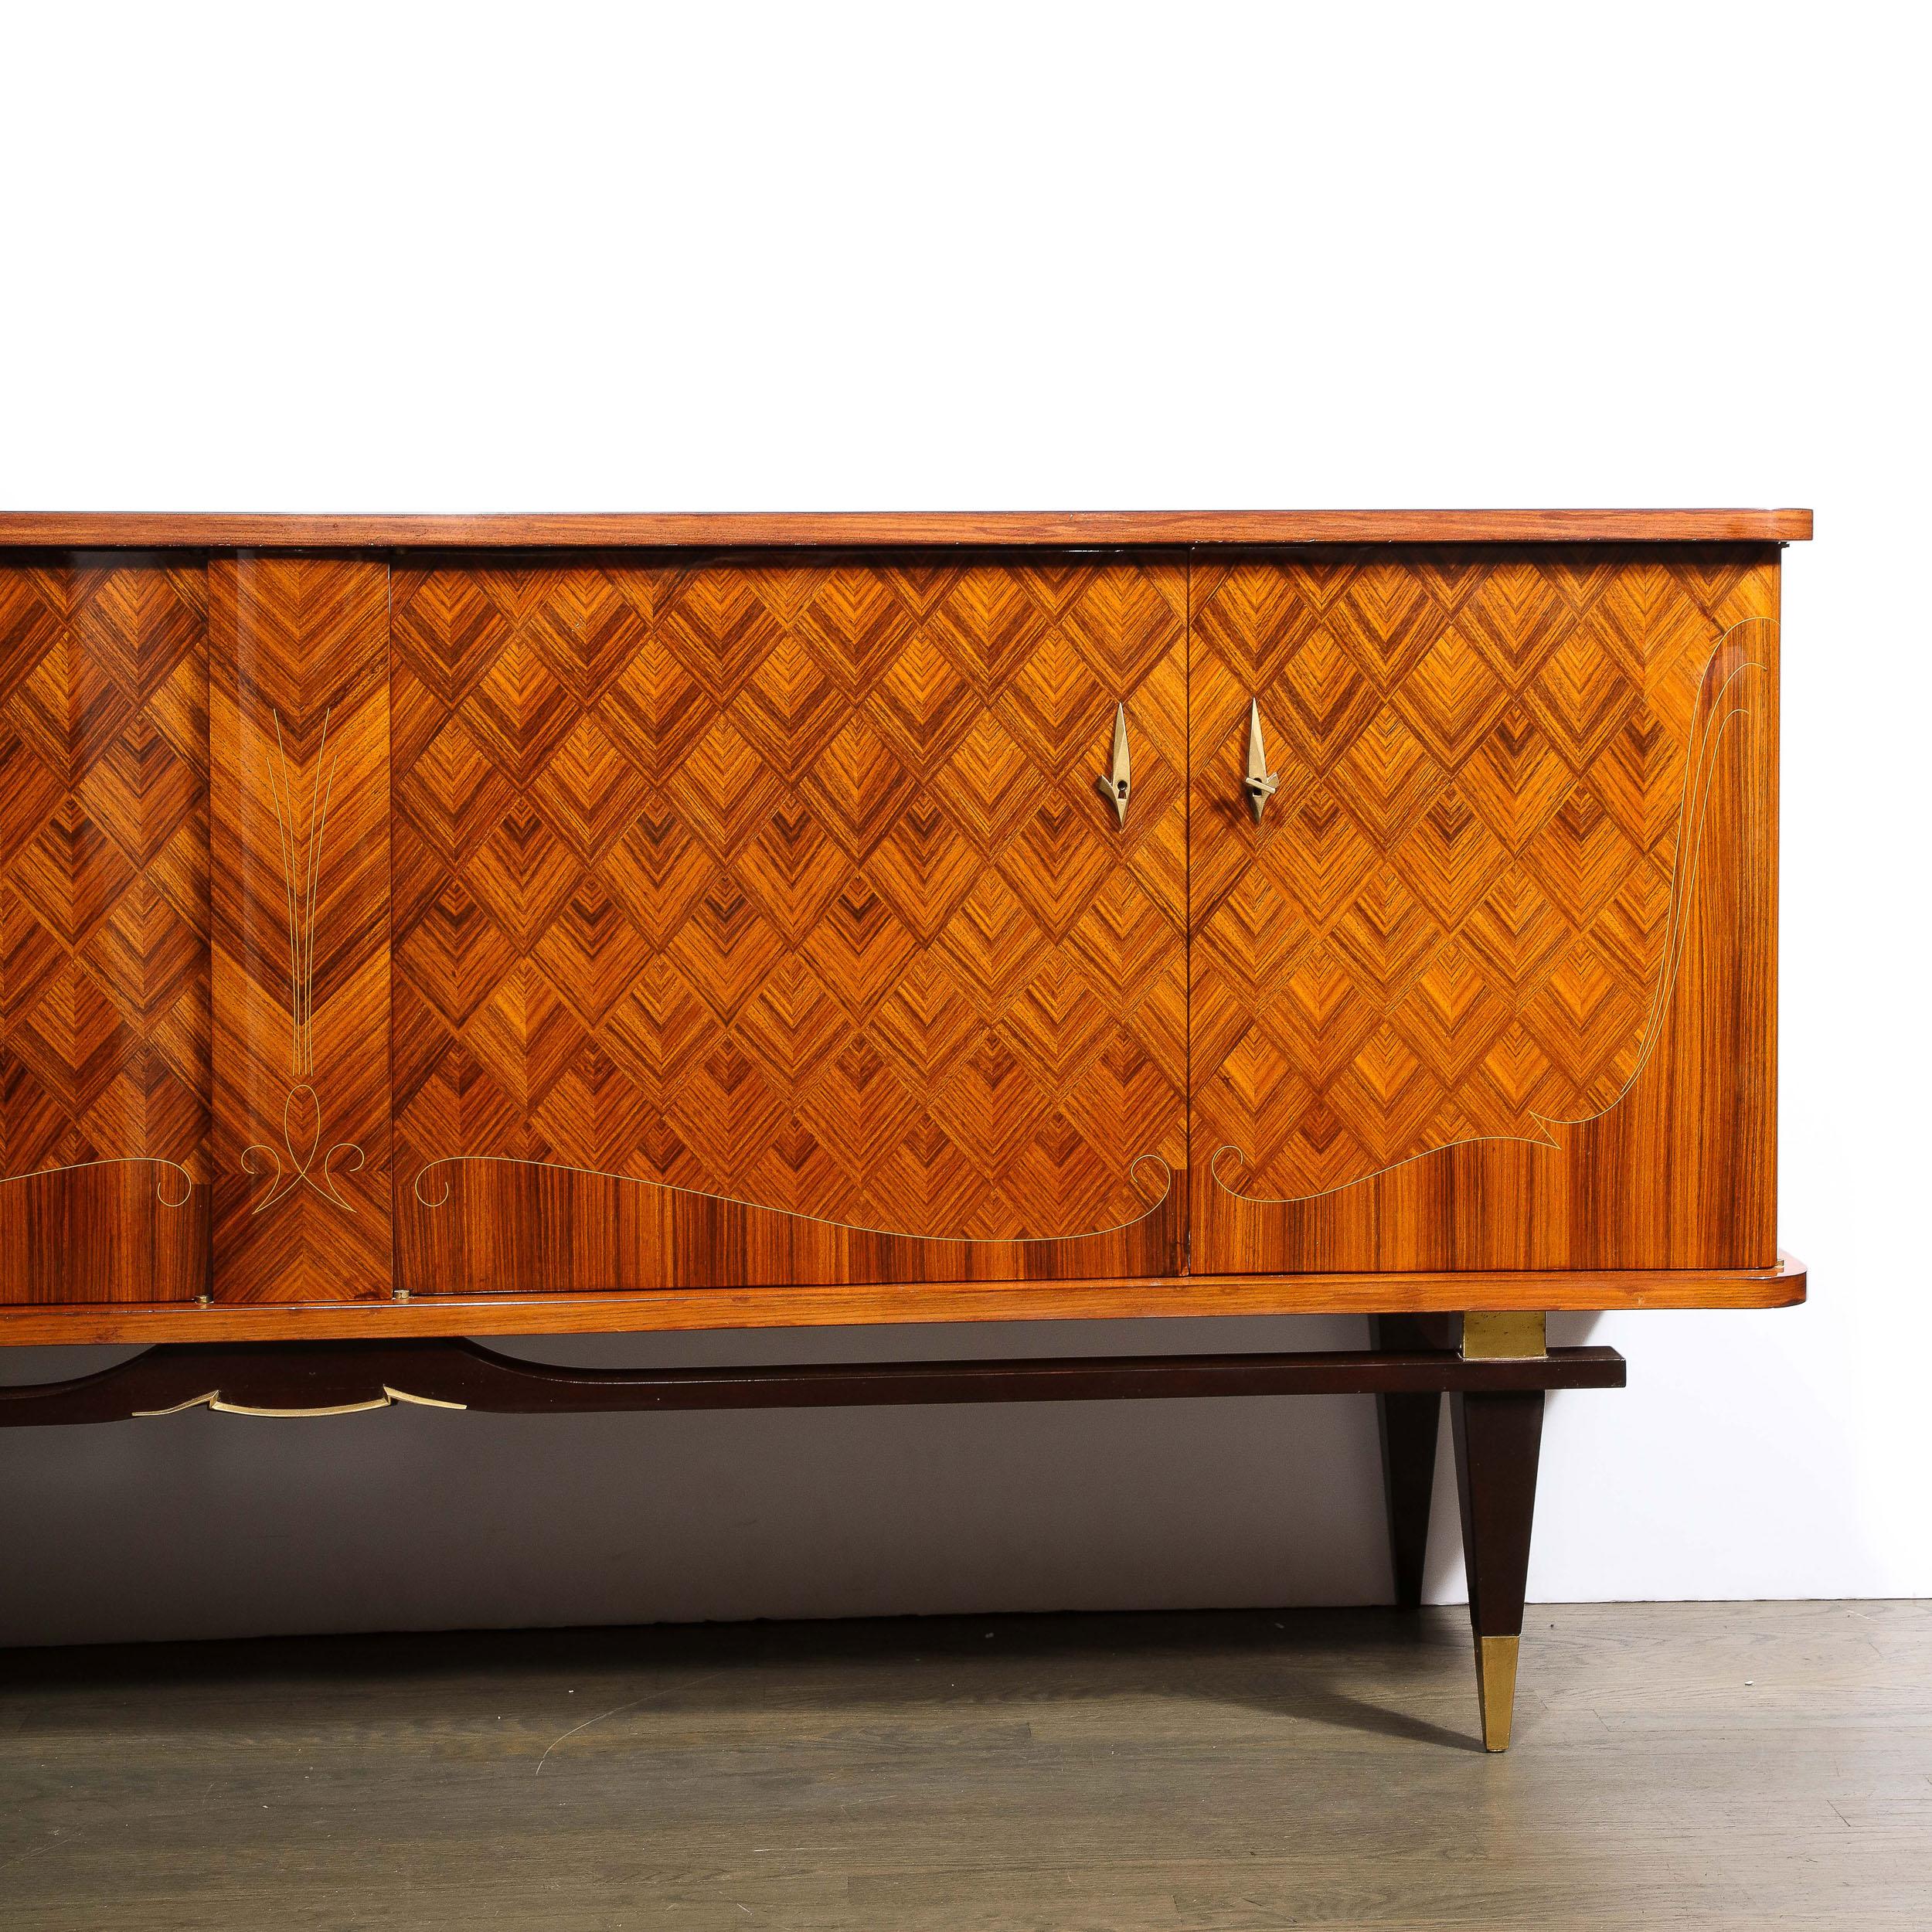 This stunning and dramatic Mid-Century Modern sideboard was realized in France circa 1950. It features four volumetric tapered rectangular legs sittings on robust brass sabots of the same form that connect to a floating sculptural apron- all in